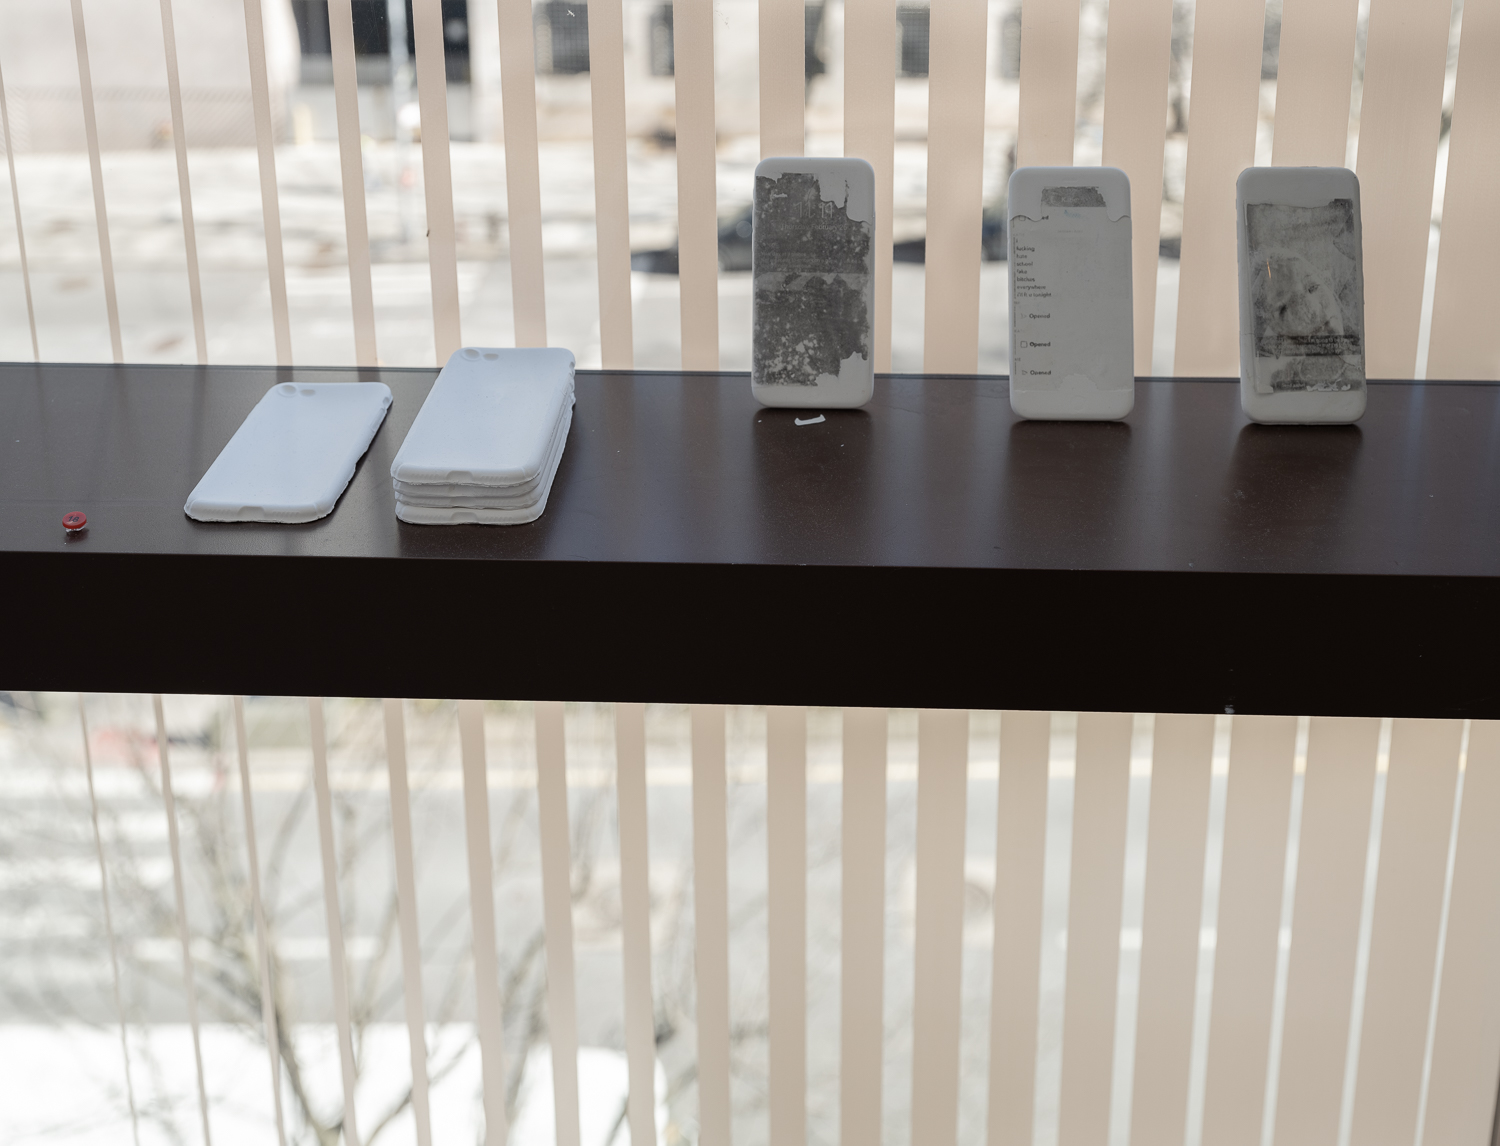 Five dummy iPhones are on display, with black-and-white screen renderings of the artist's memories